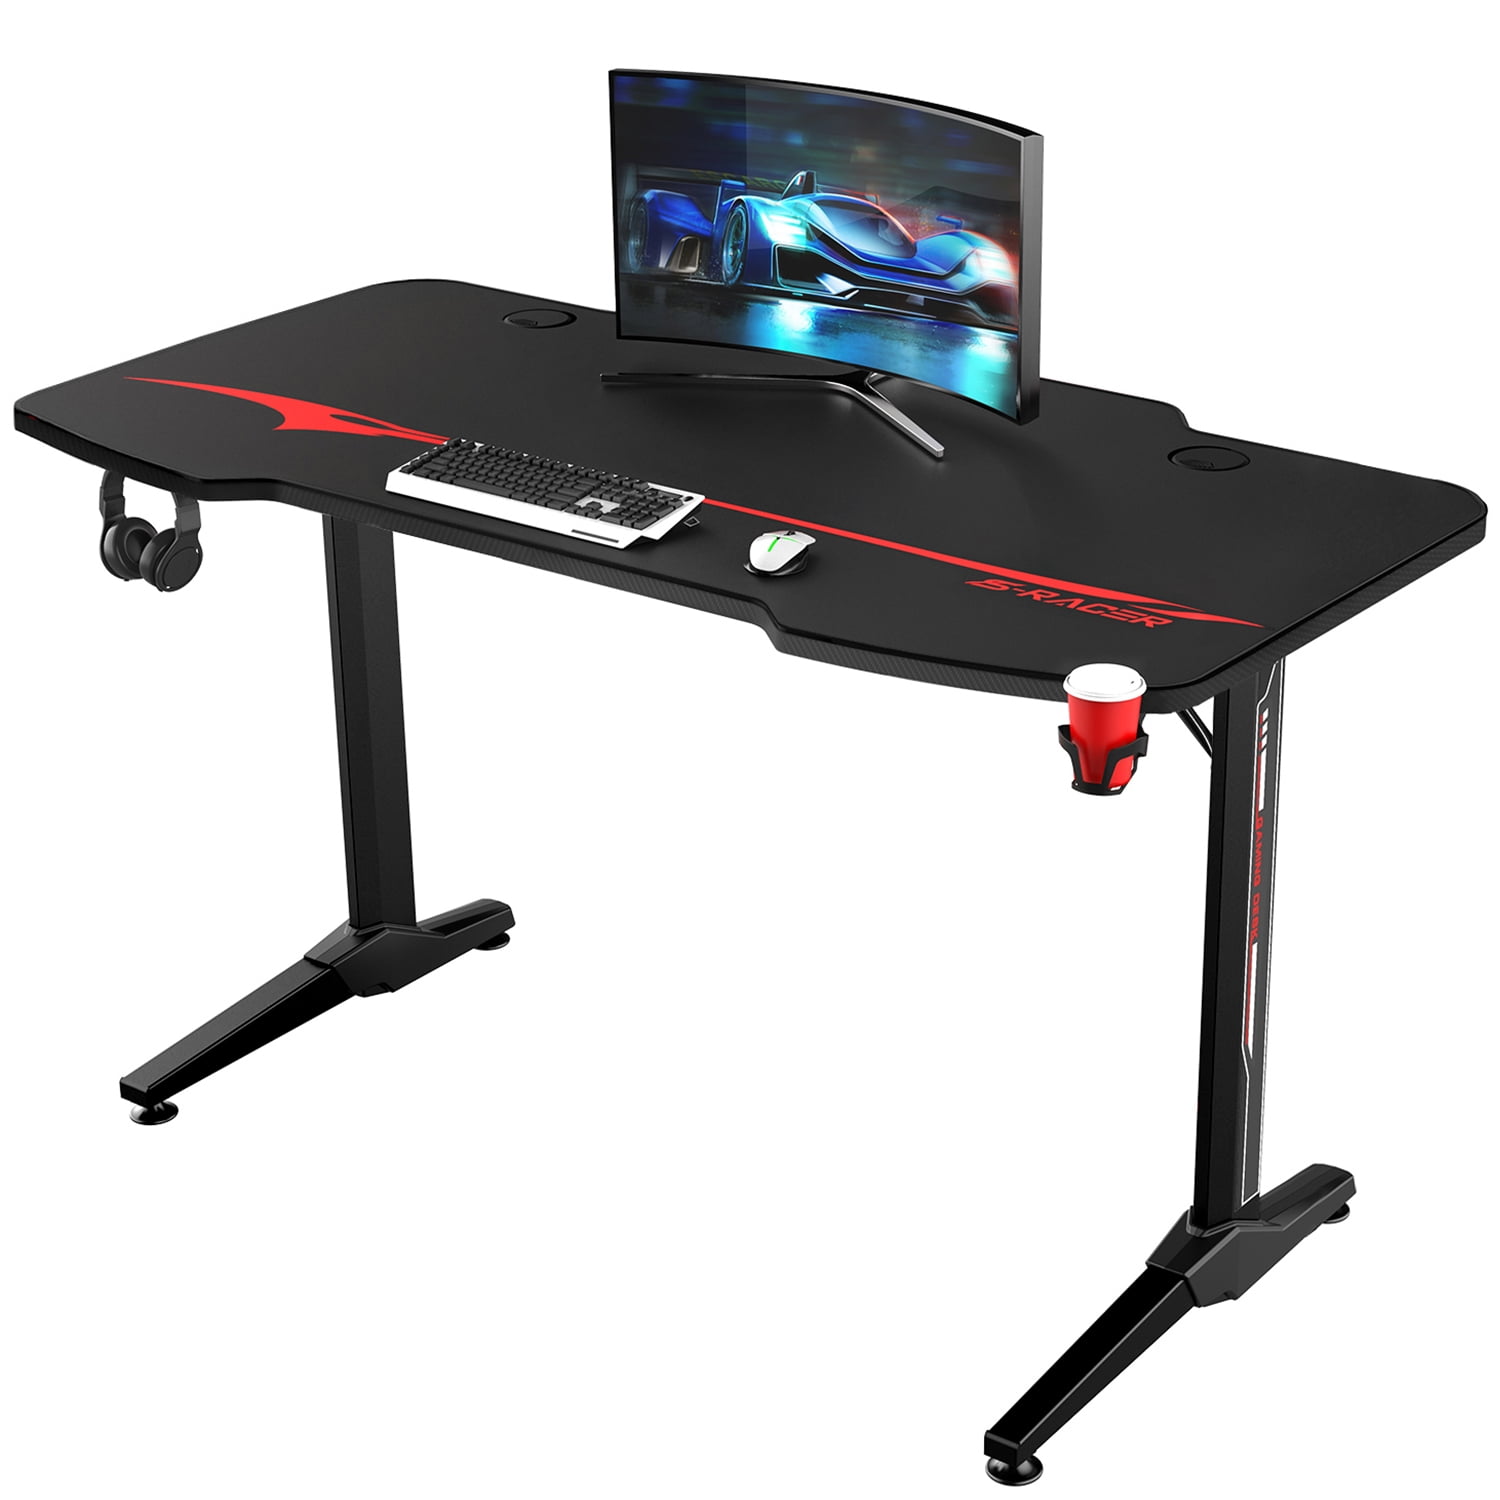 Teak and Black Legs 47 inches All-in-one Gaming Table/Workstation with Display Stand DlandHome Gaming Computer Desk with RGB LED Mouse Pad 1 Pack ND14 Pro